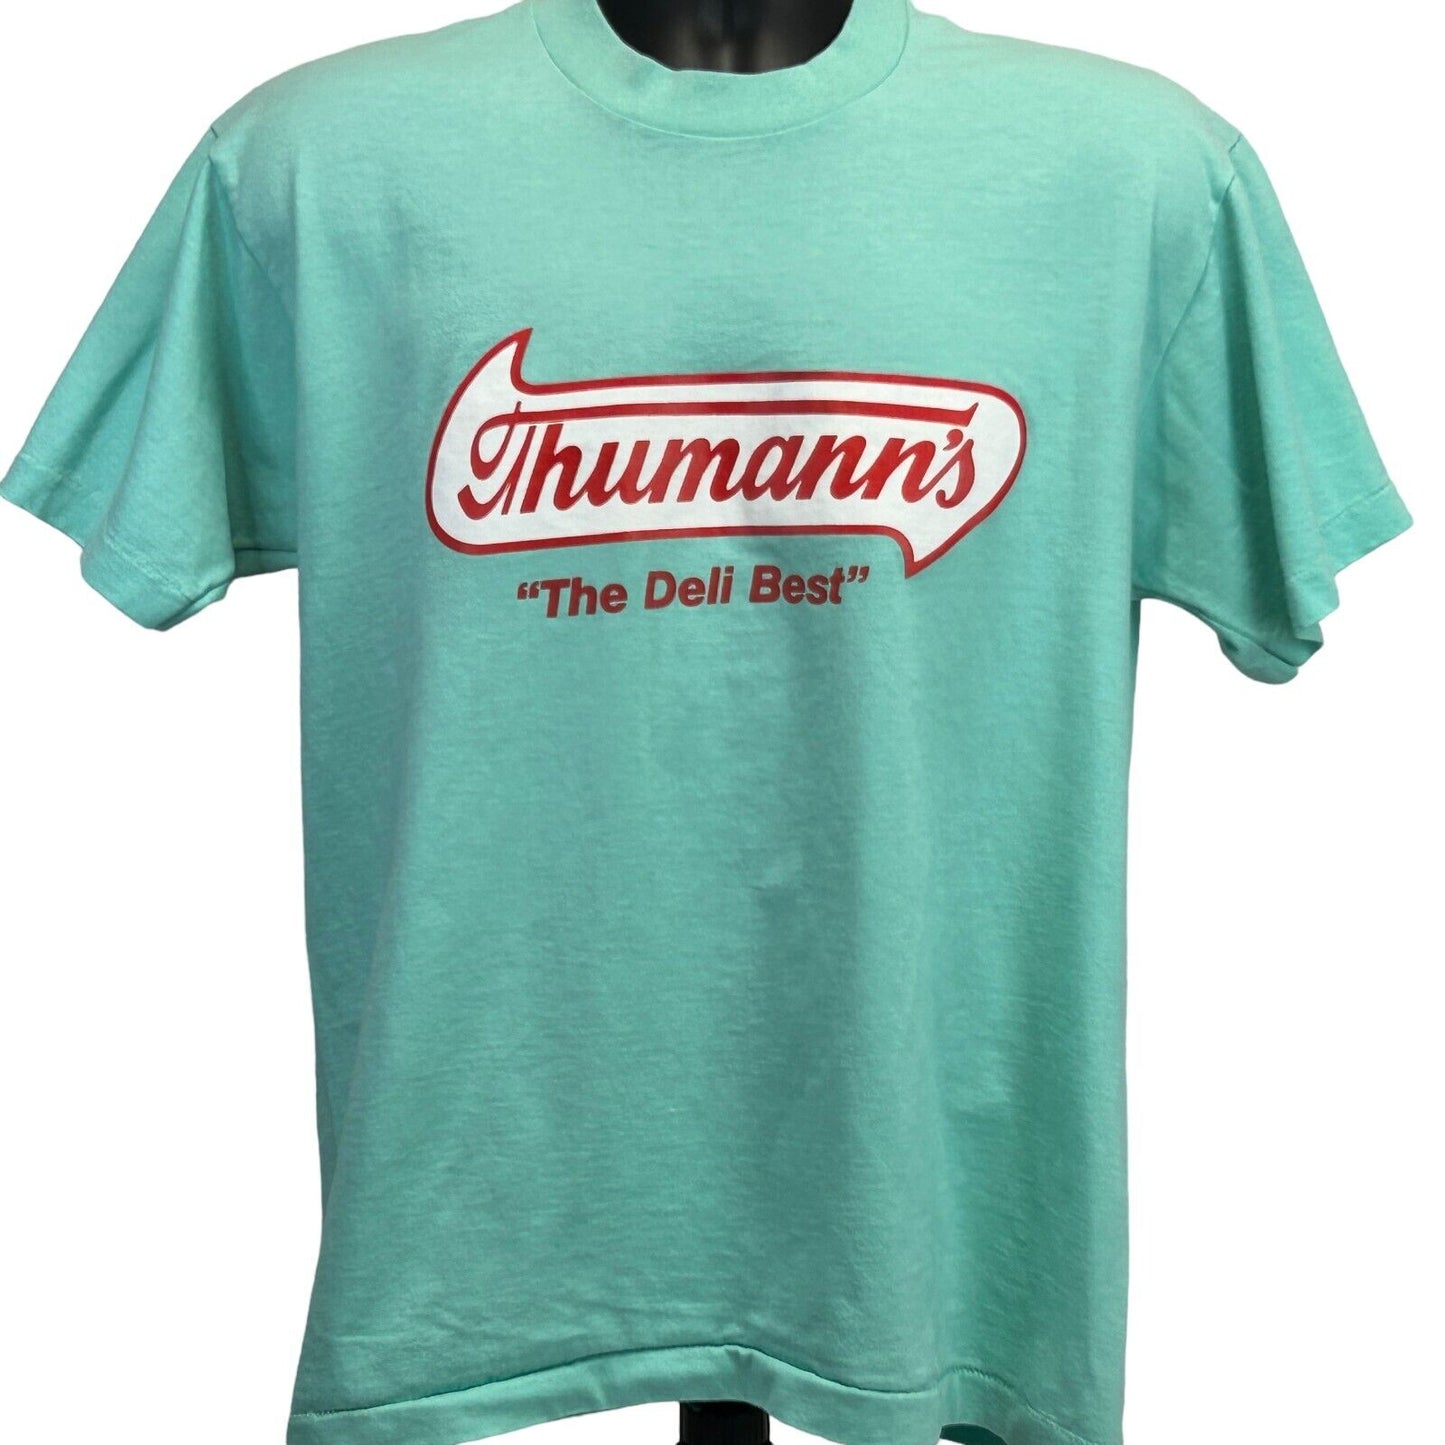 Thumanns Deli Best Vintage 90s T Shirt Stransky Provisions Made In USA Tee Large